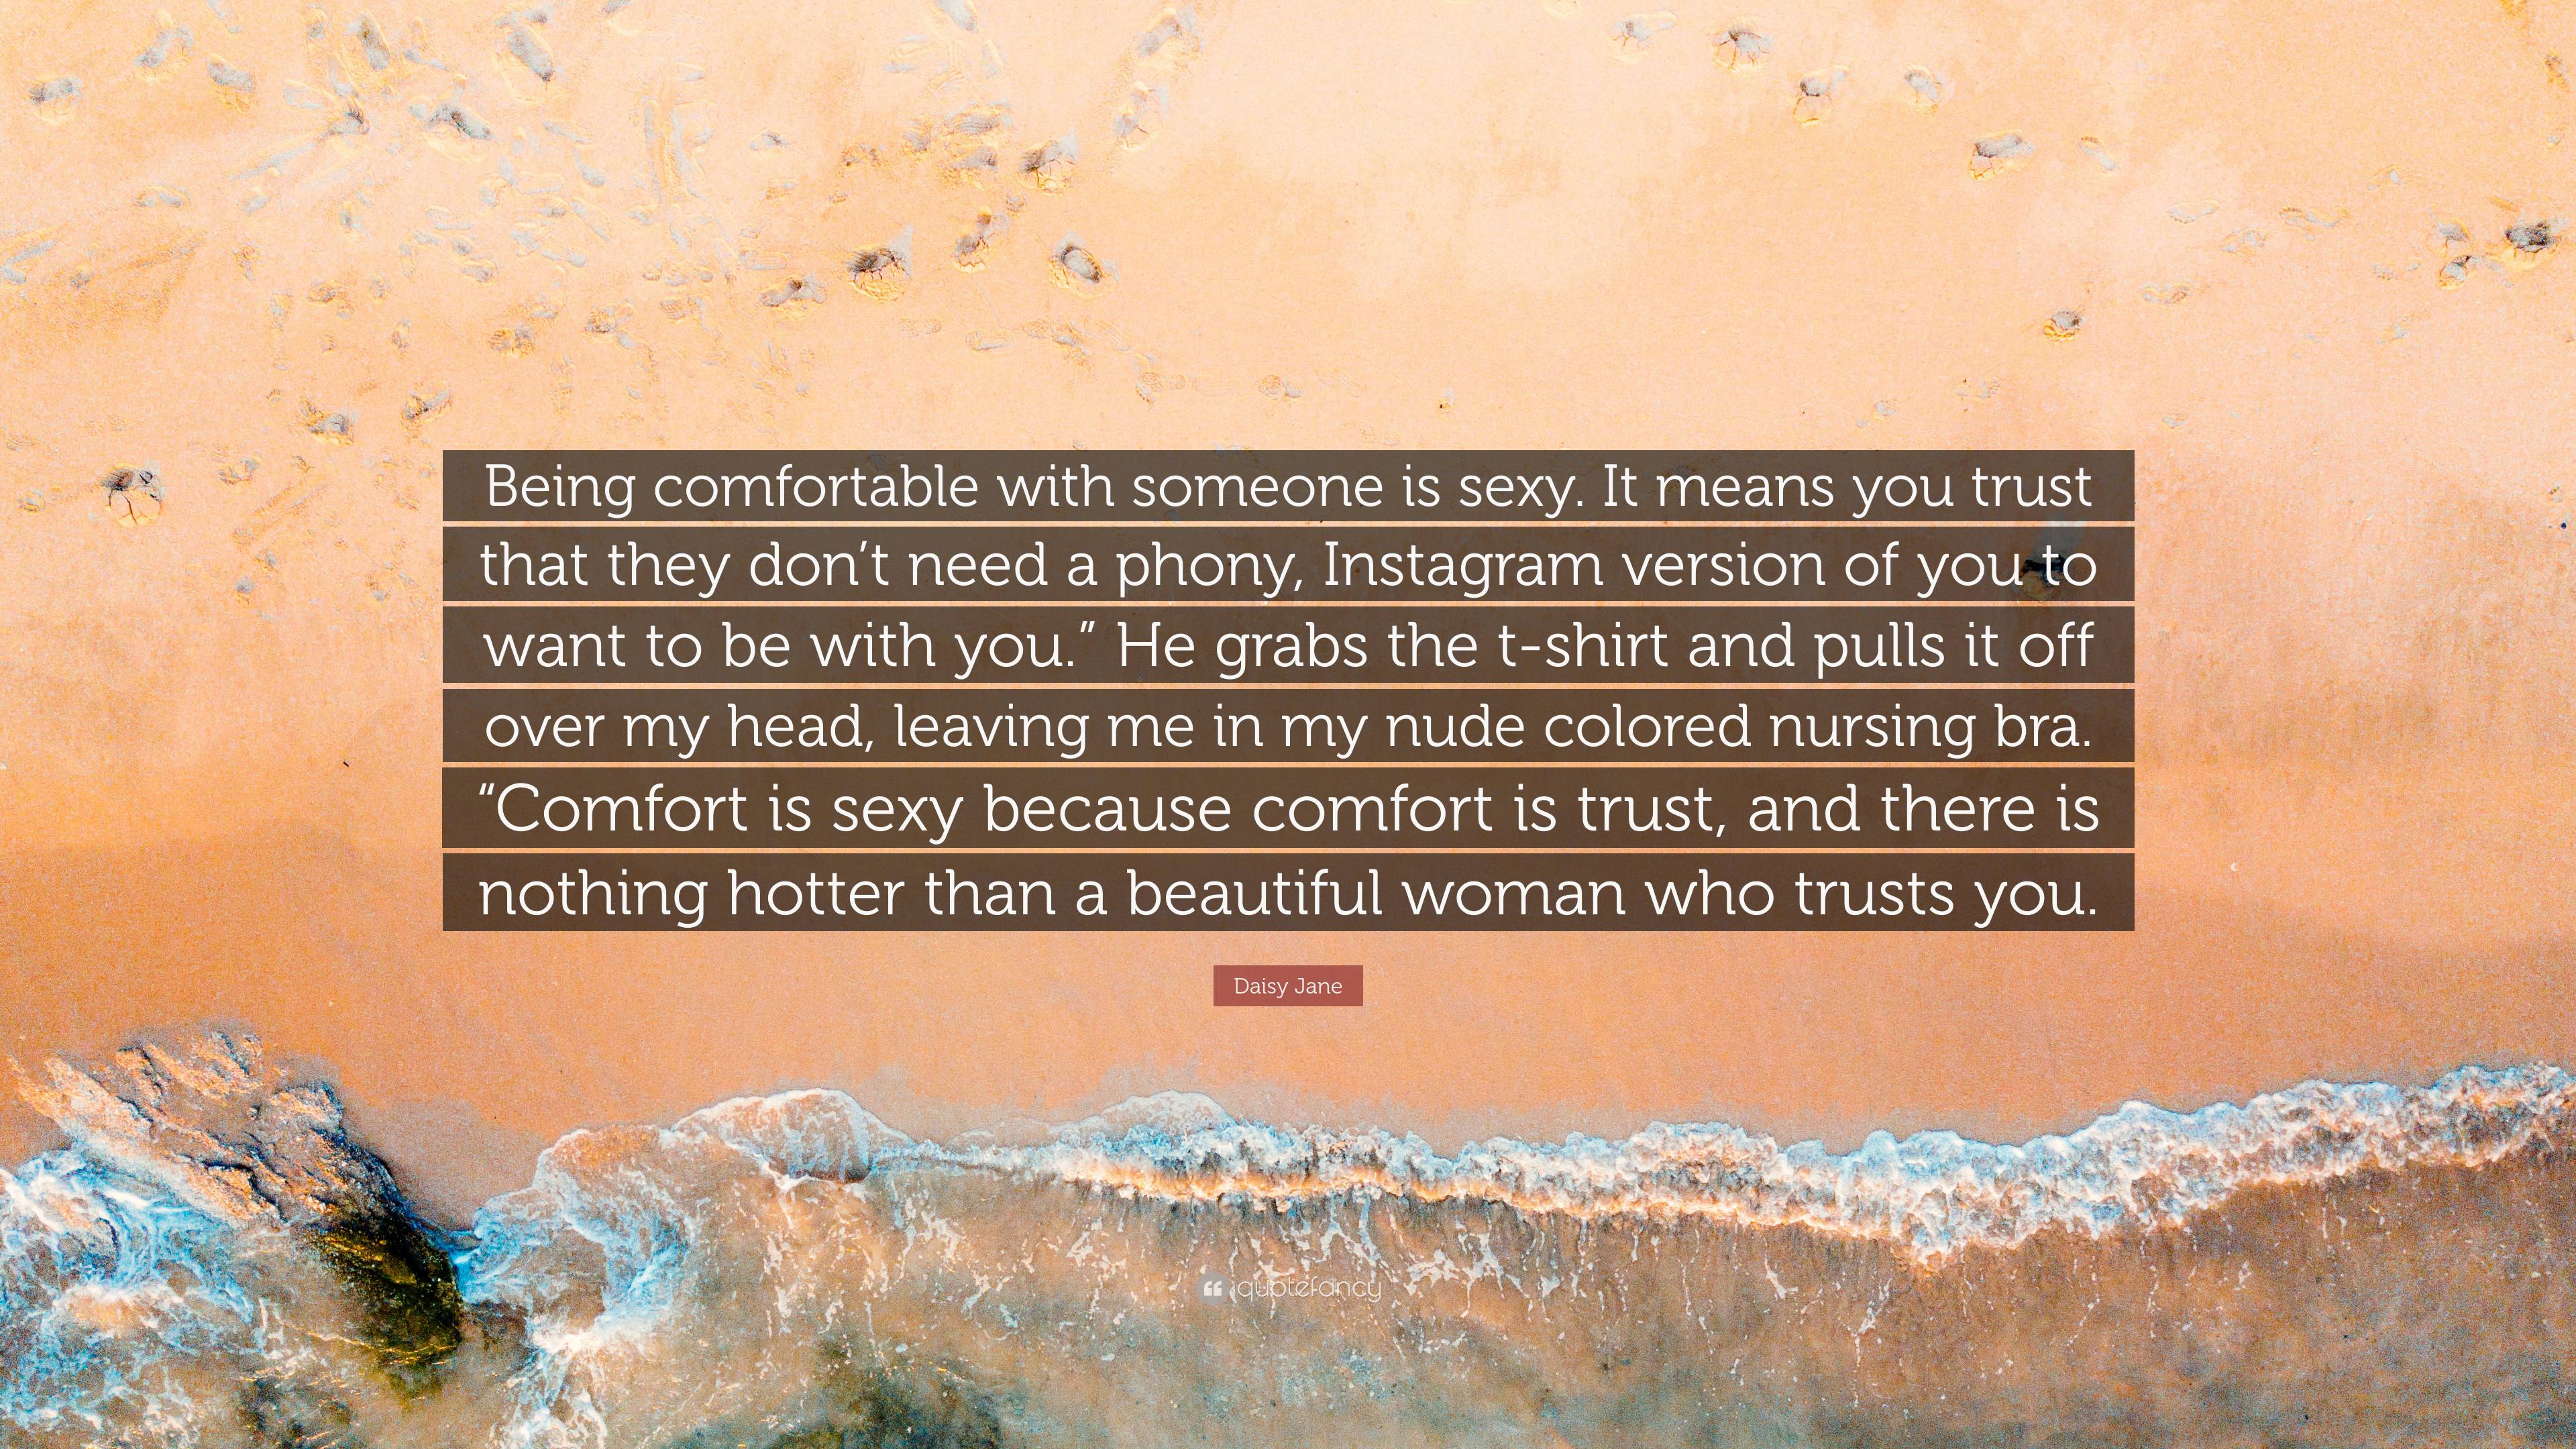 Daisy Jane Quote: “Being comfortable with someone is sexy. It